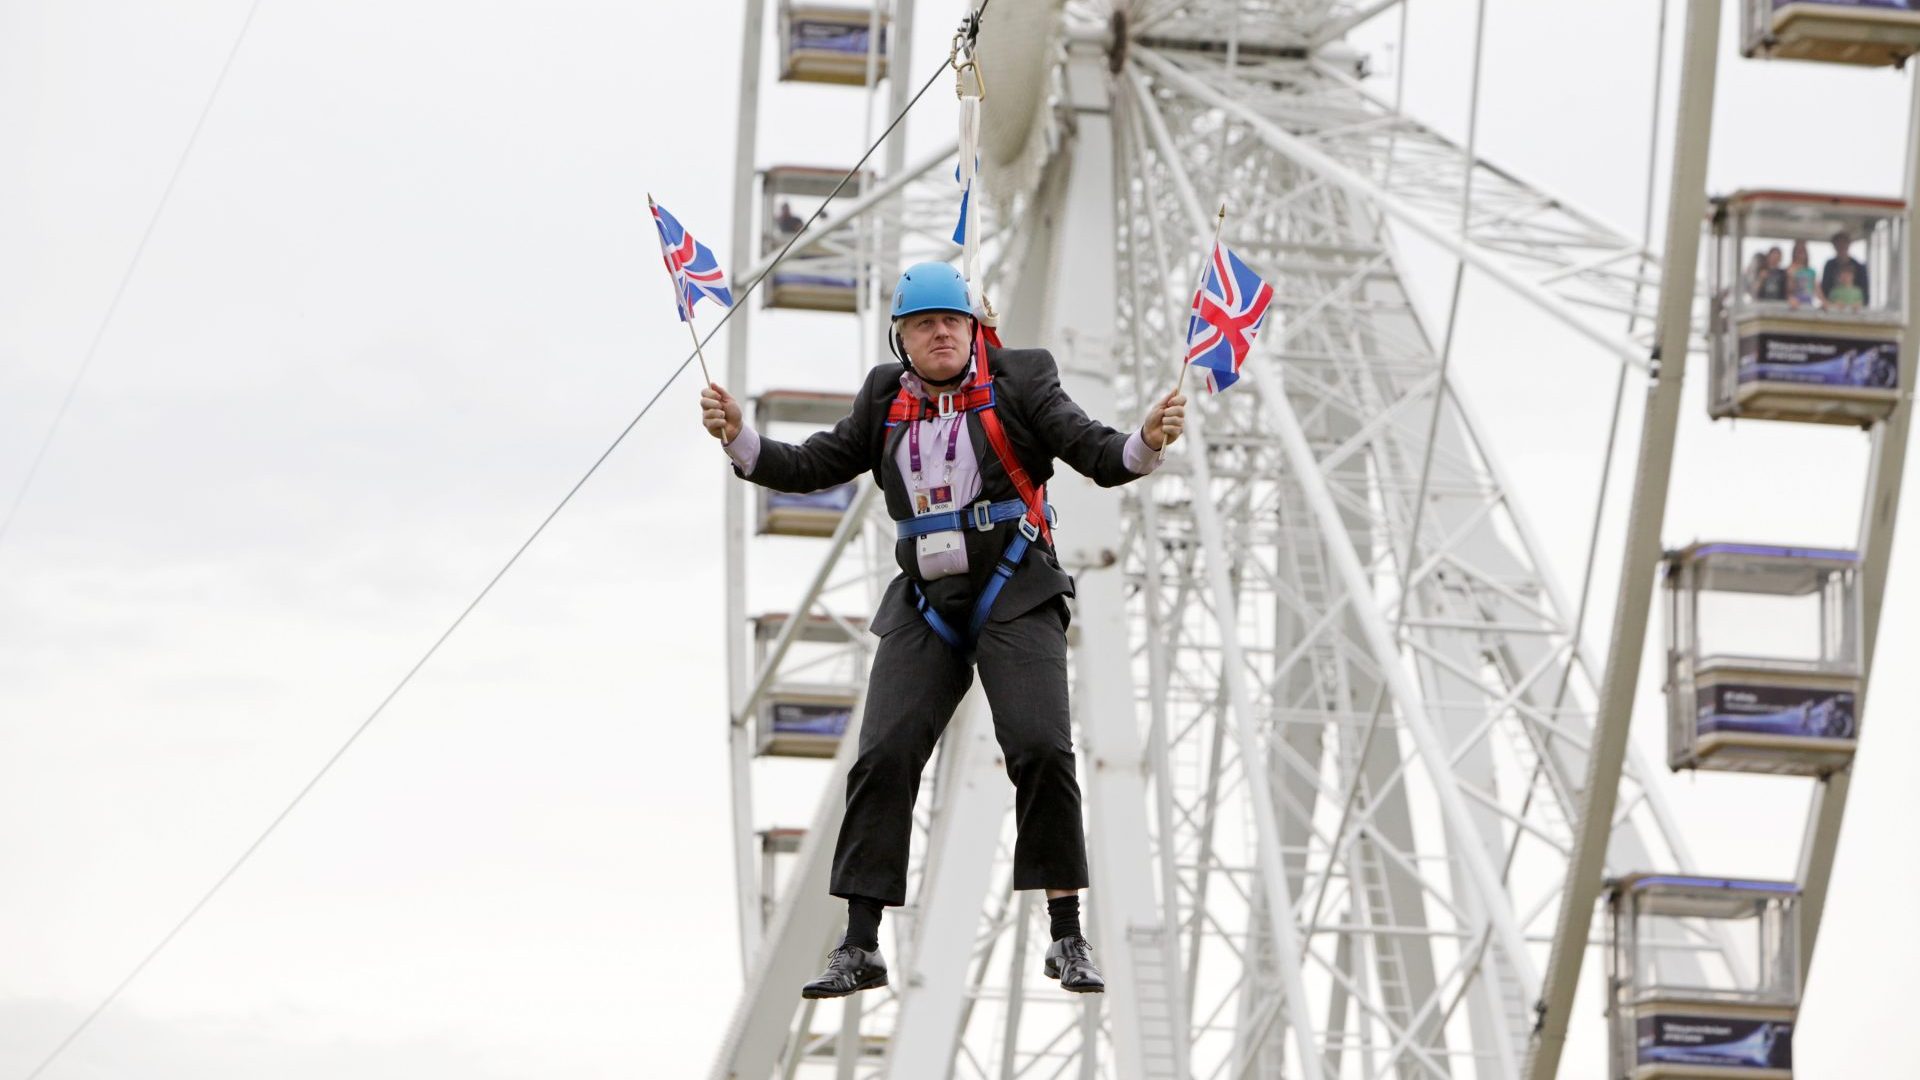 Boris Johnson got stuck on a zip-line during BT London Live in Victoria Park back in 2012. Photo: Barcroft Media via Getty Images